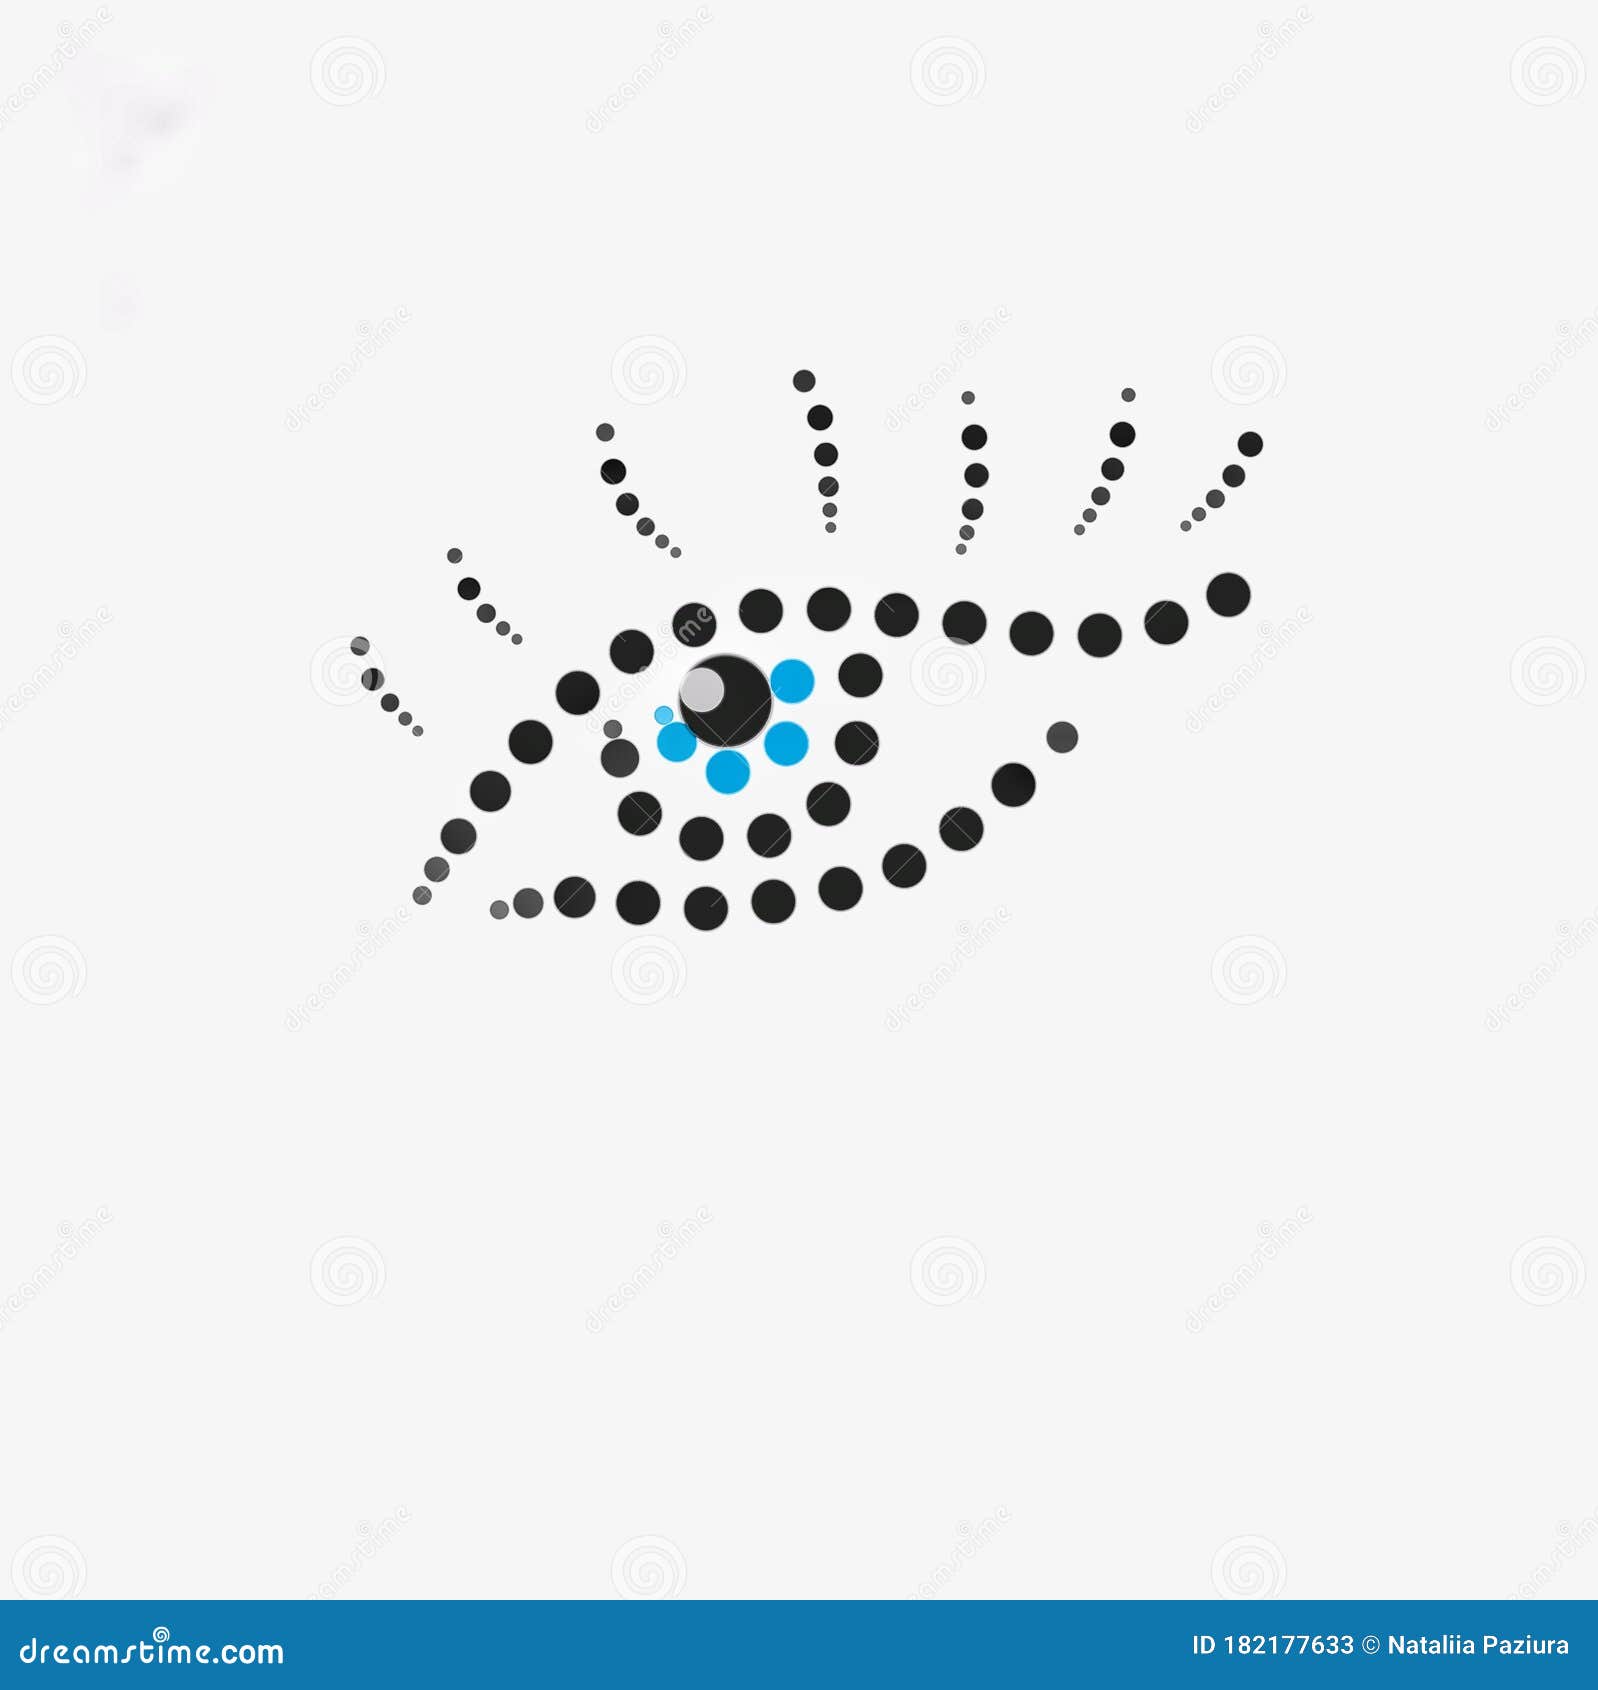 eye made of dots on white background. icon eye.  in white, black, blue background. web . banner, icon wallpaper.